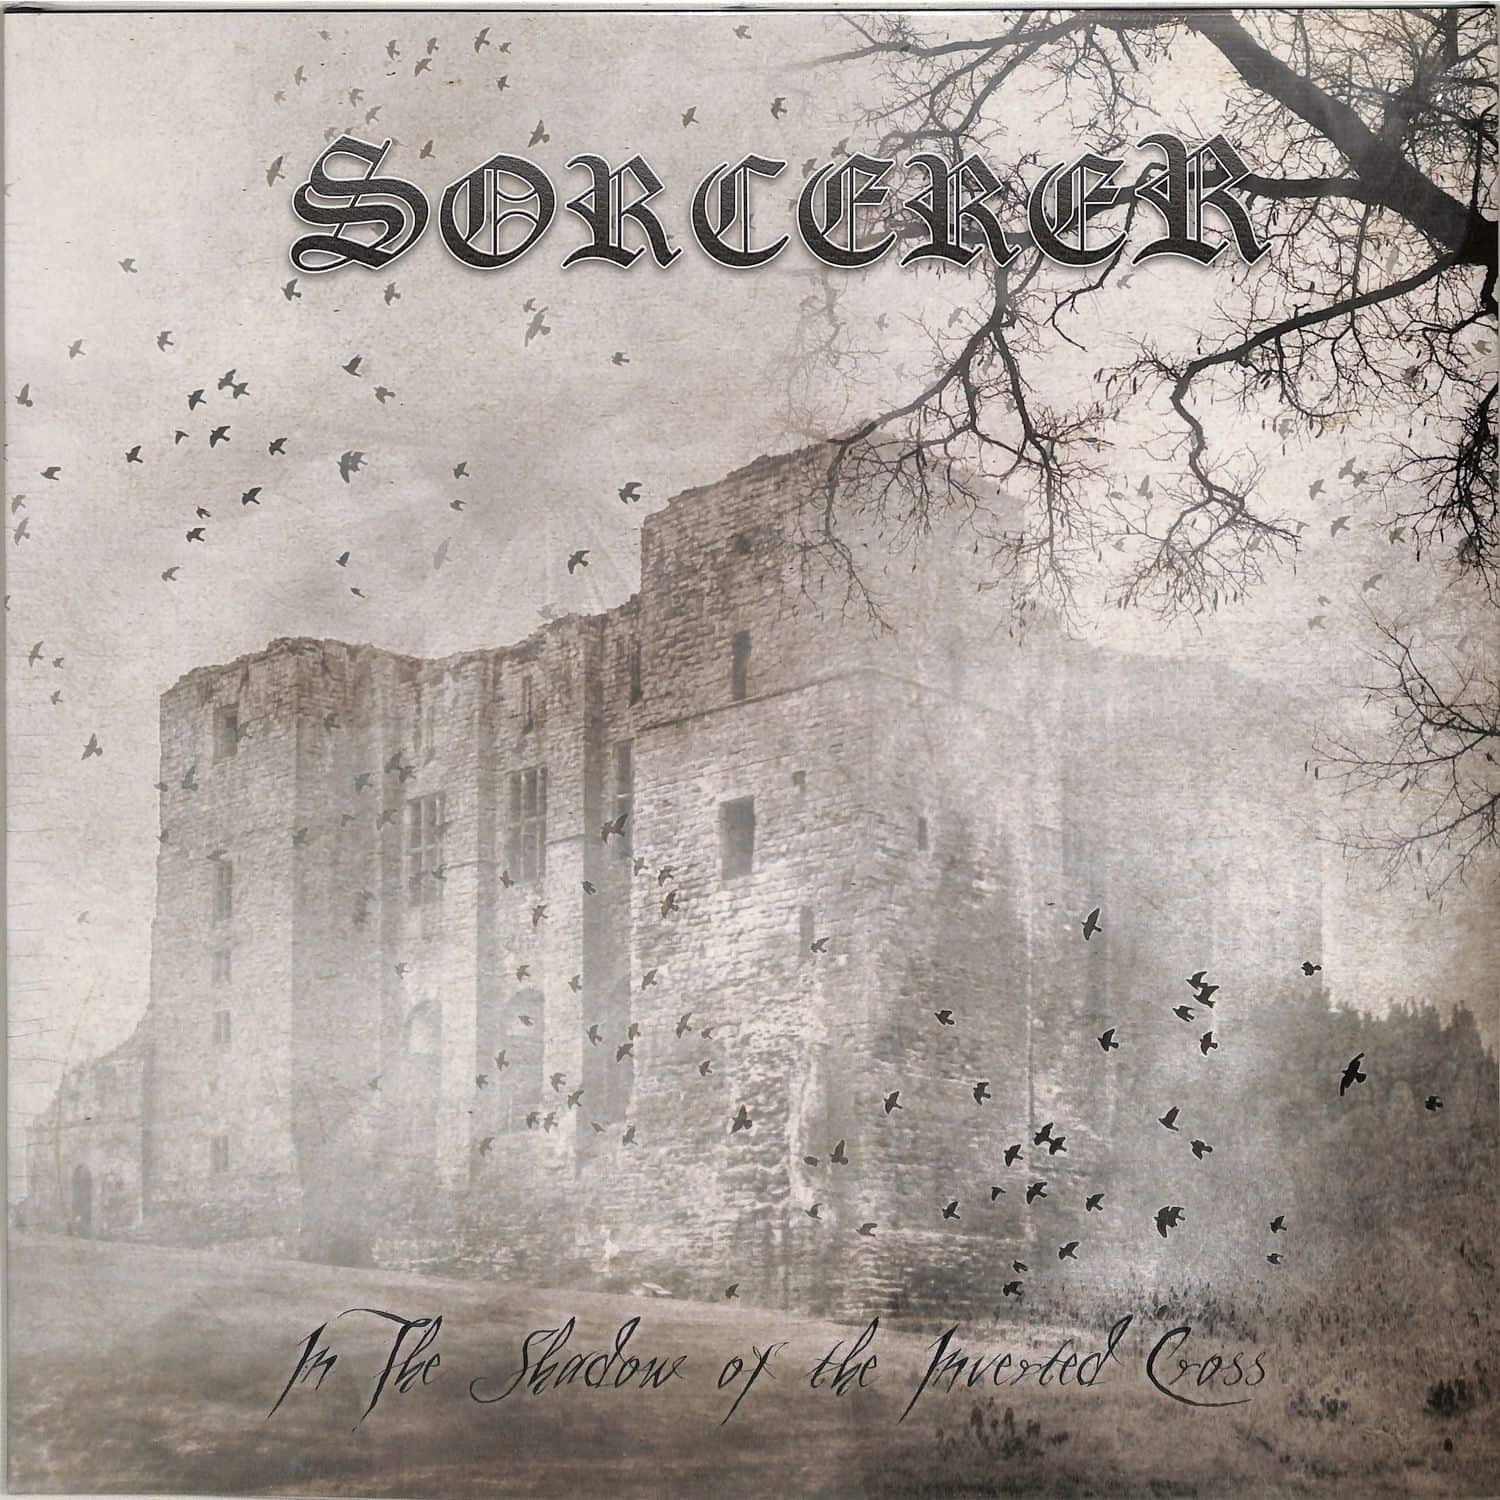 Sorcerer - IN THE SHADOW OF THE INVERTED CROSS 